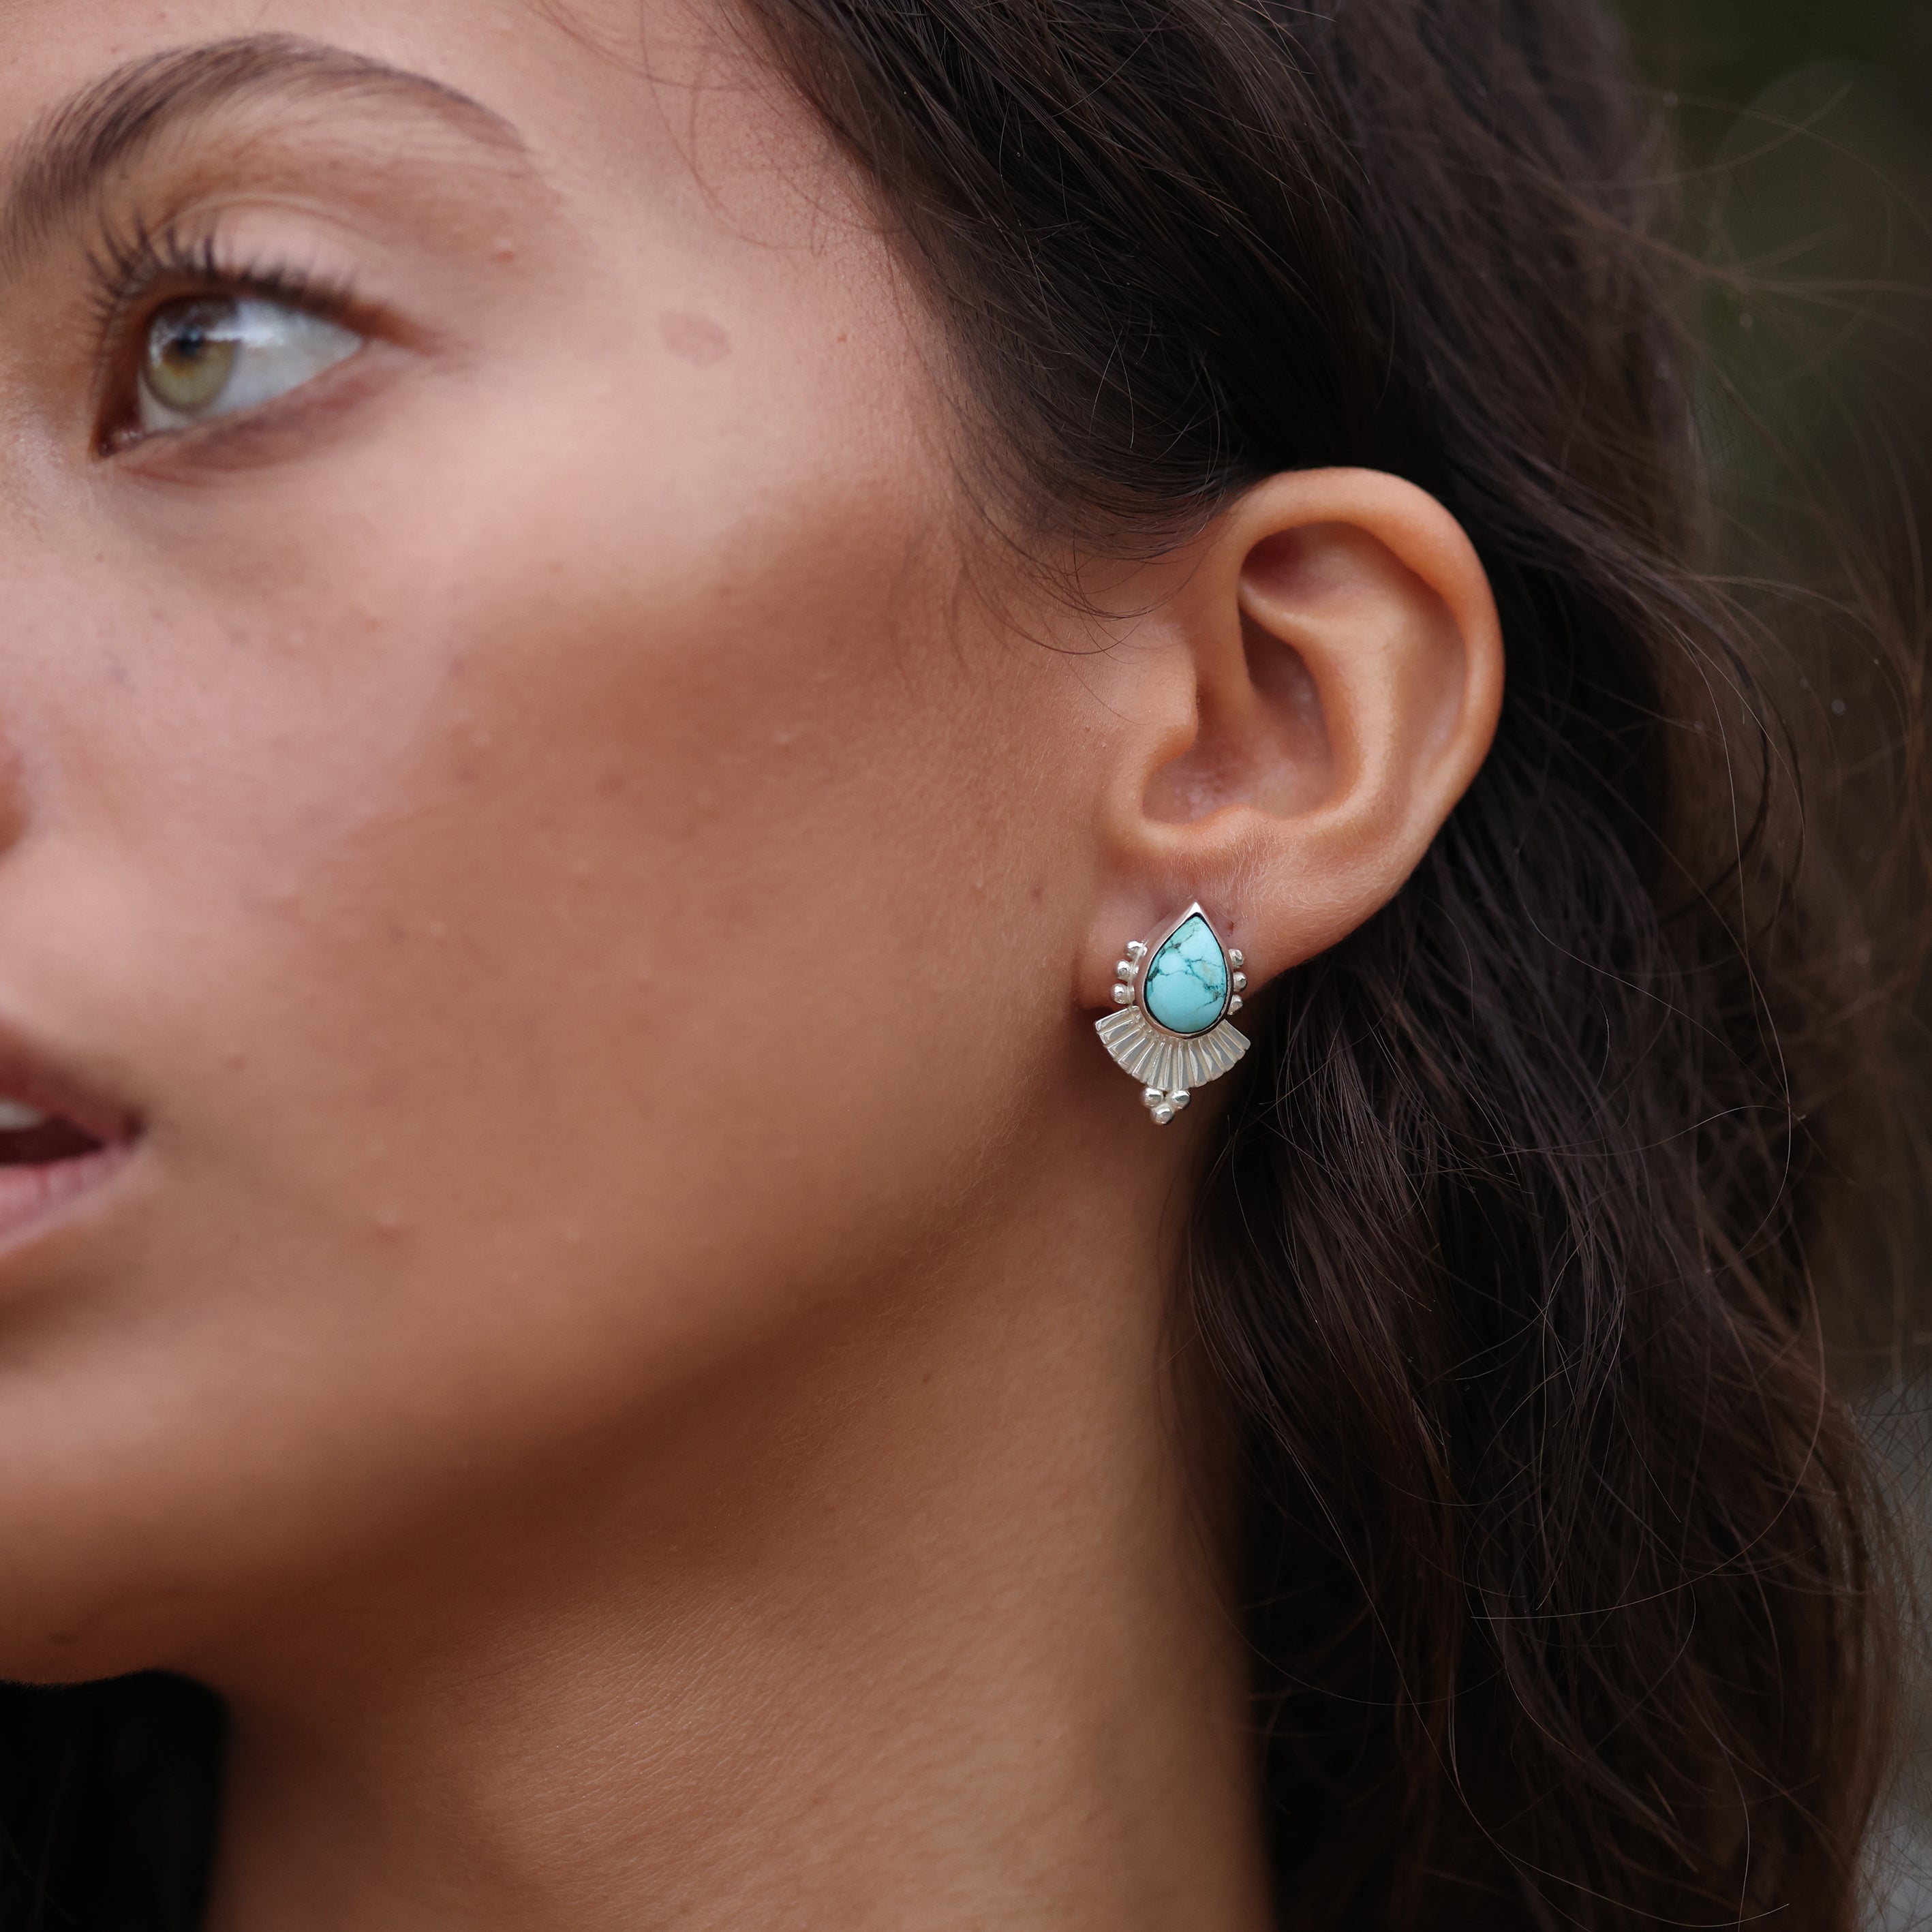 Cleopatra Turquoise Earrings